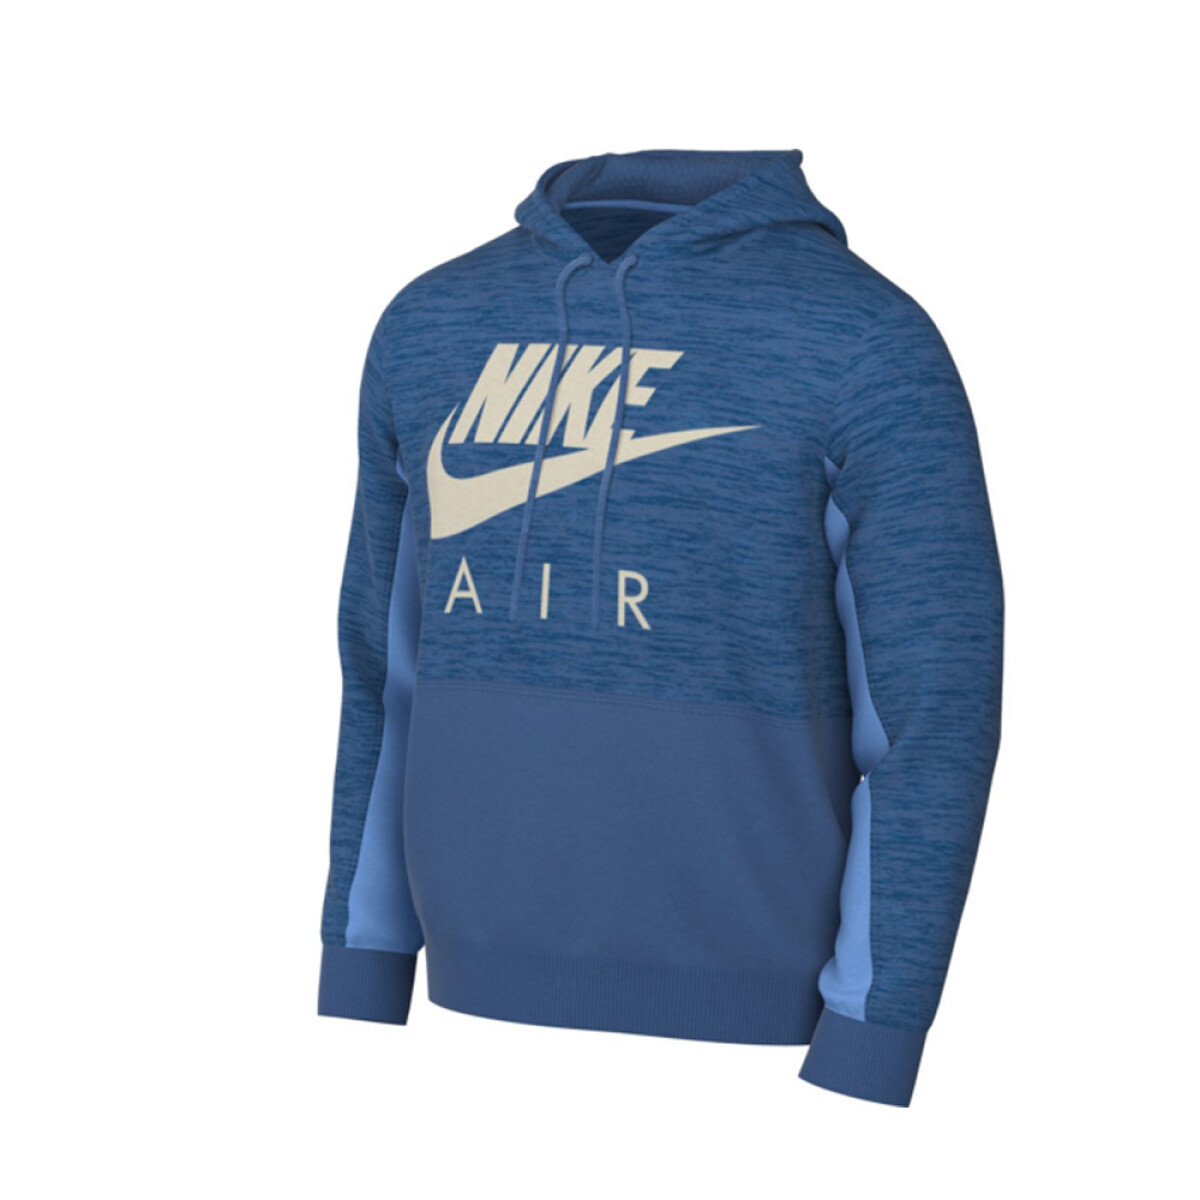 CANGURO NIKE AIR BRUSHED-BACK FLEECE PULLOVER HOODIE - Blue 